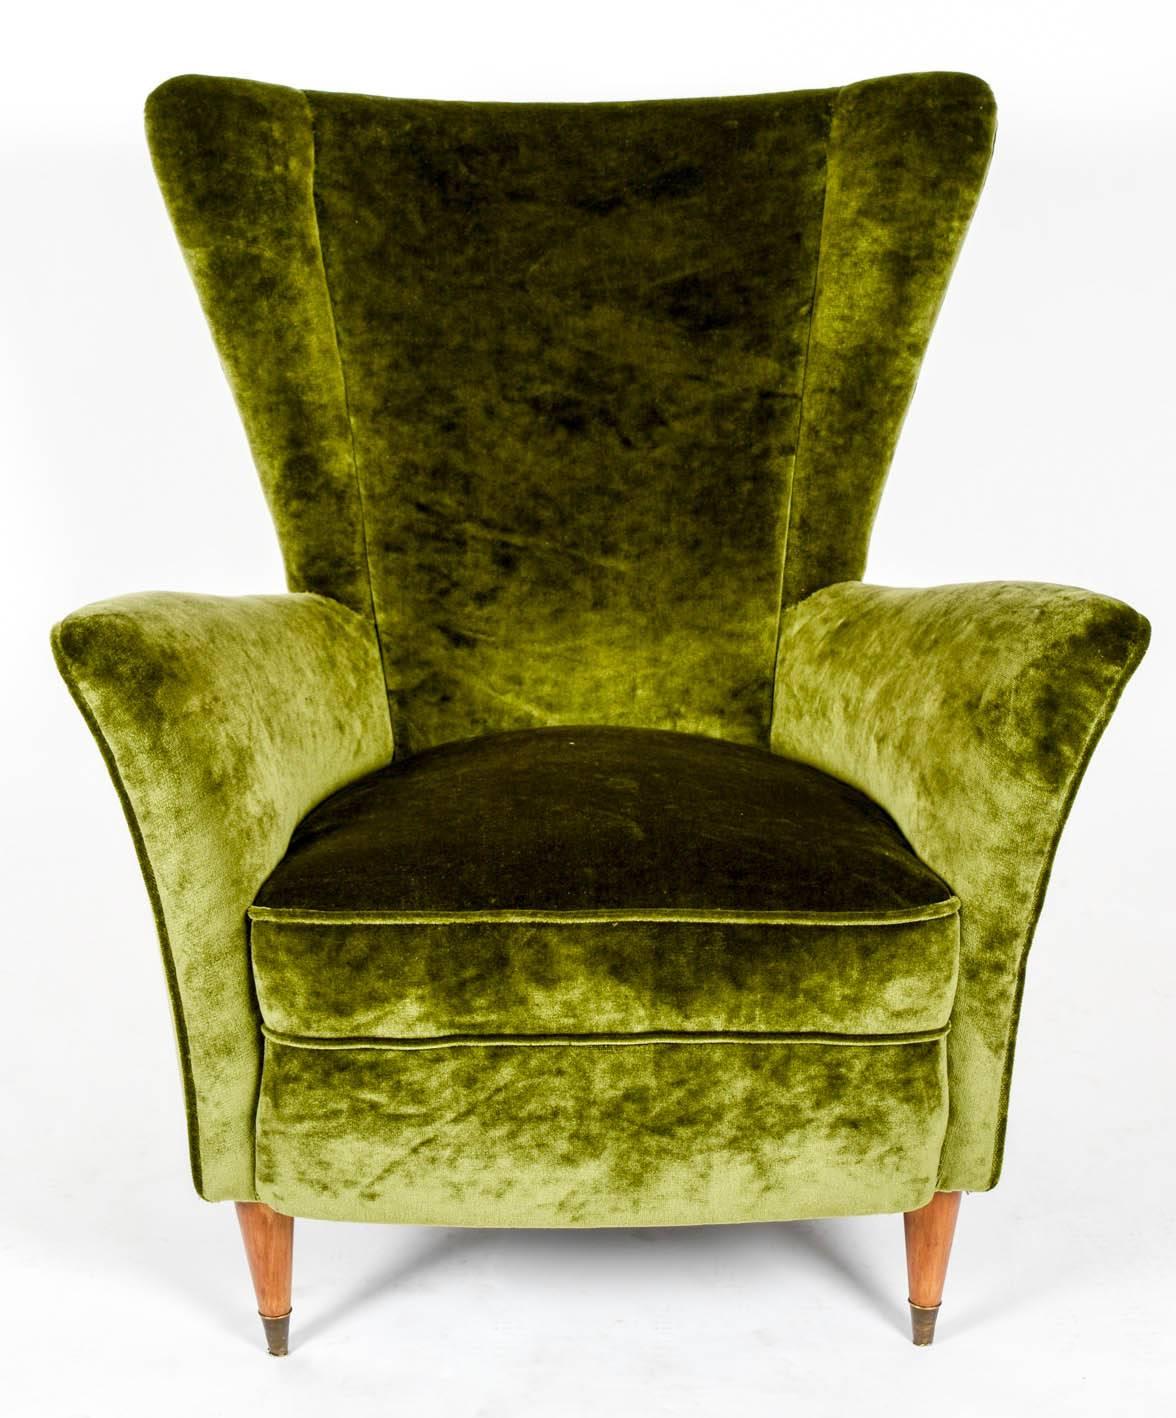 Pair of vintage armchairs, newly upholstered with a green Rubelli velvet, four wood legs, the two front legs with brass casters.